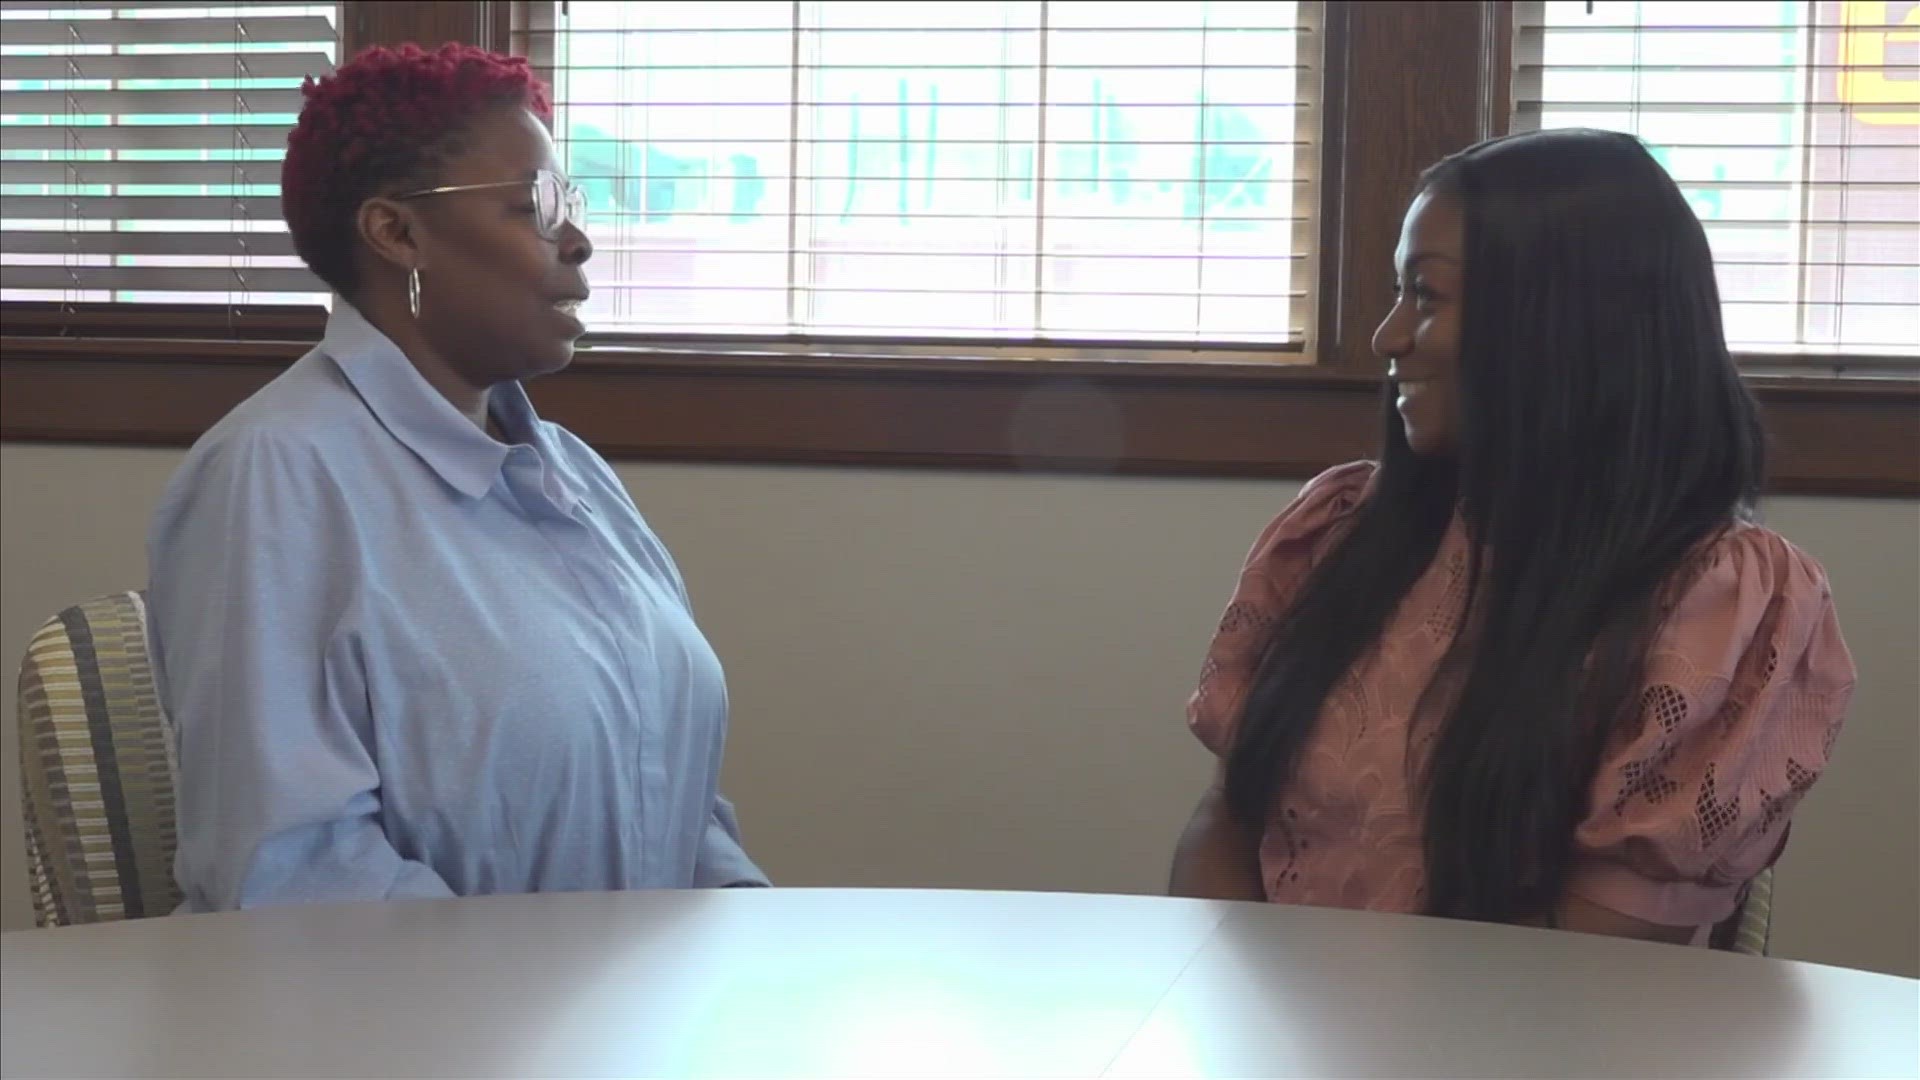 We talk to two sisters who are fighting the disease in their own ways, together.